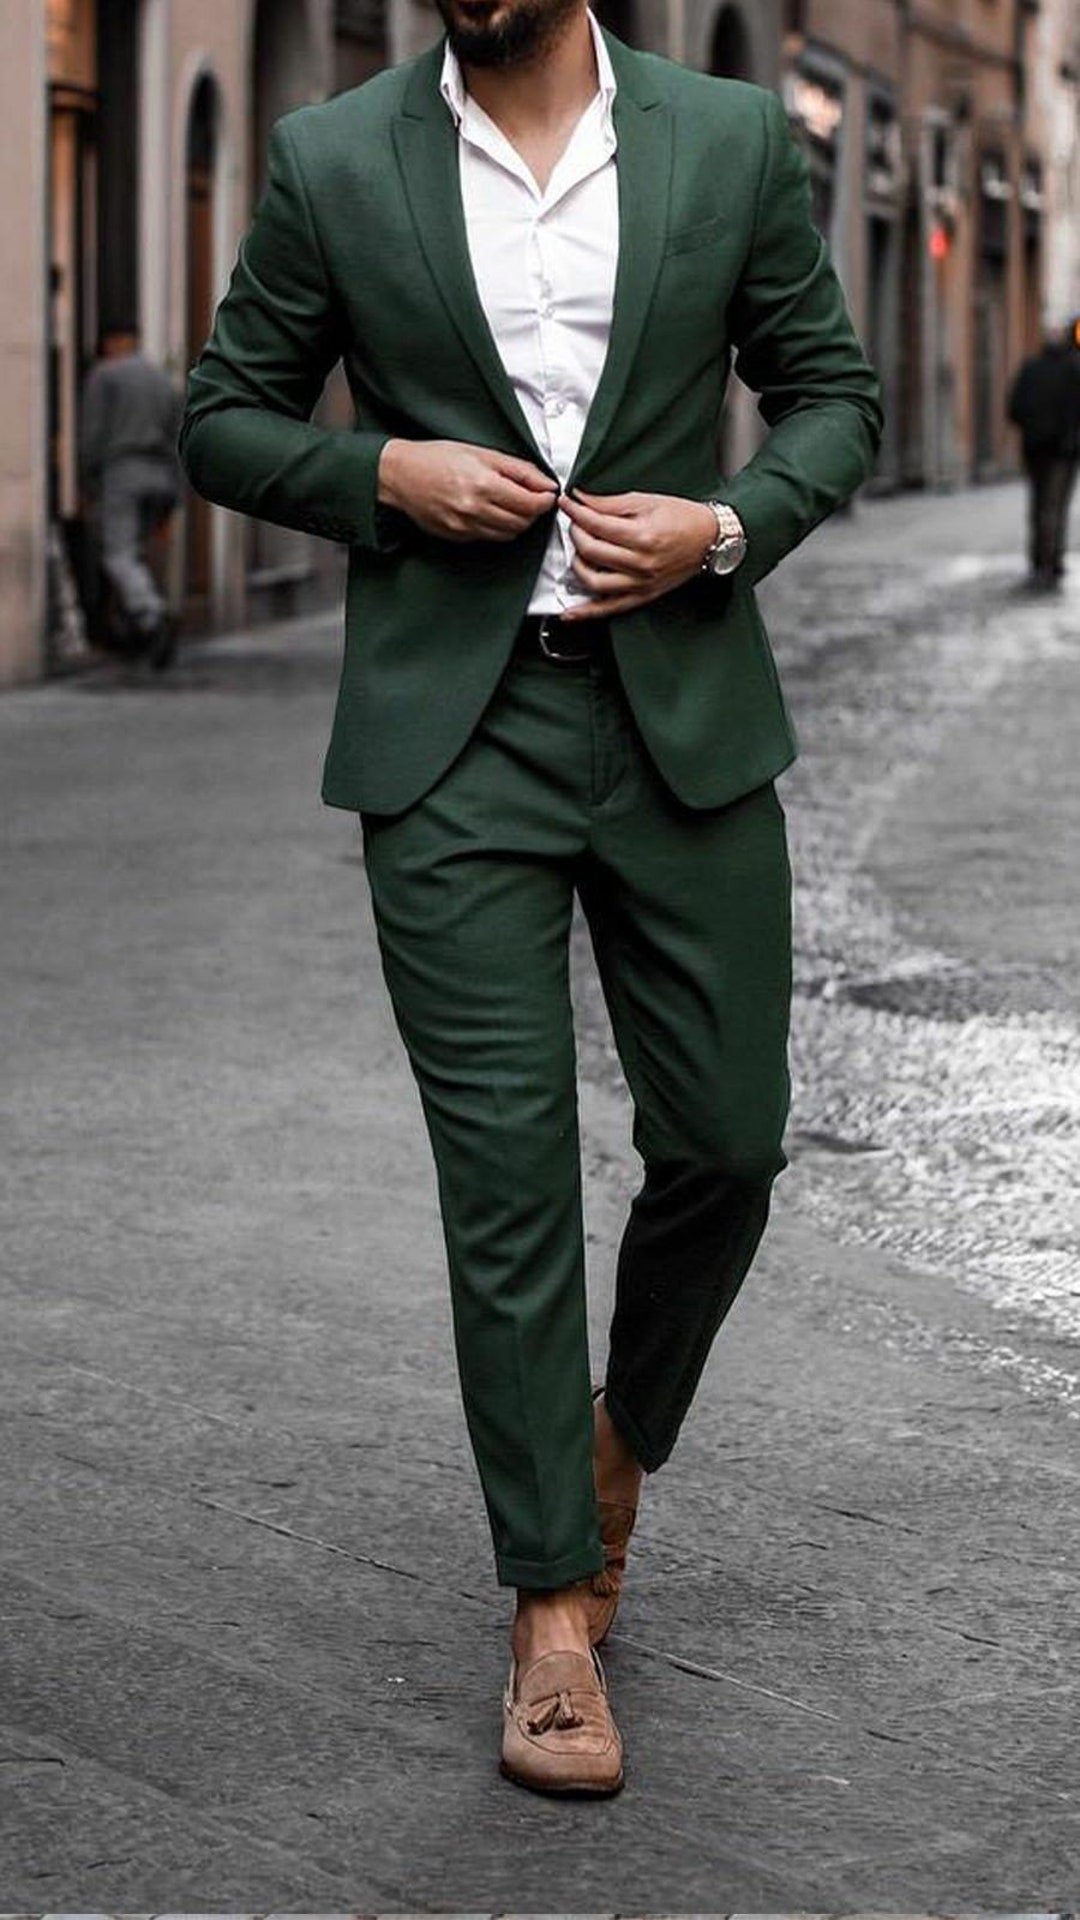 Add some colour to wardrobe with this emerald green suit | Green suit men, Green  suit, Green blazer outfit